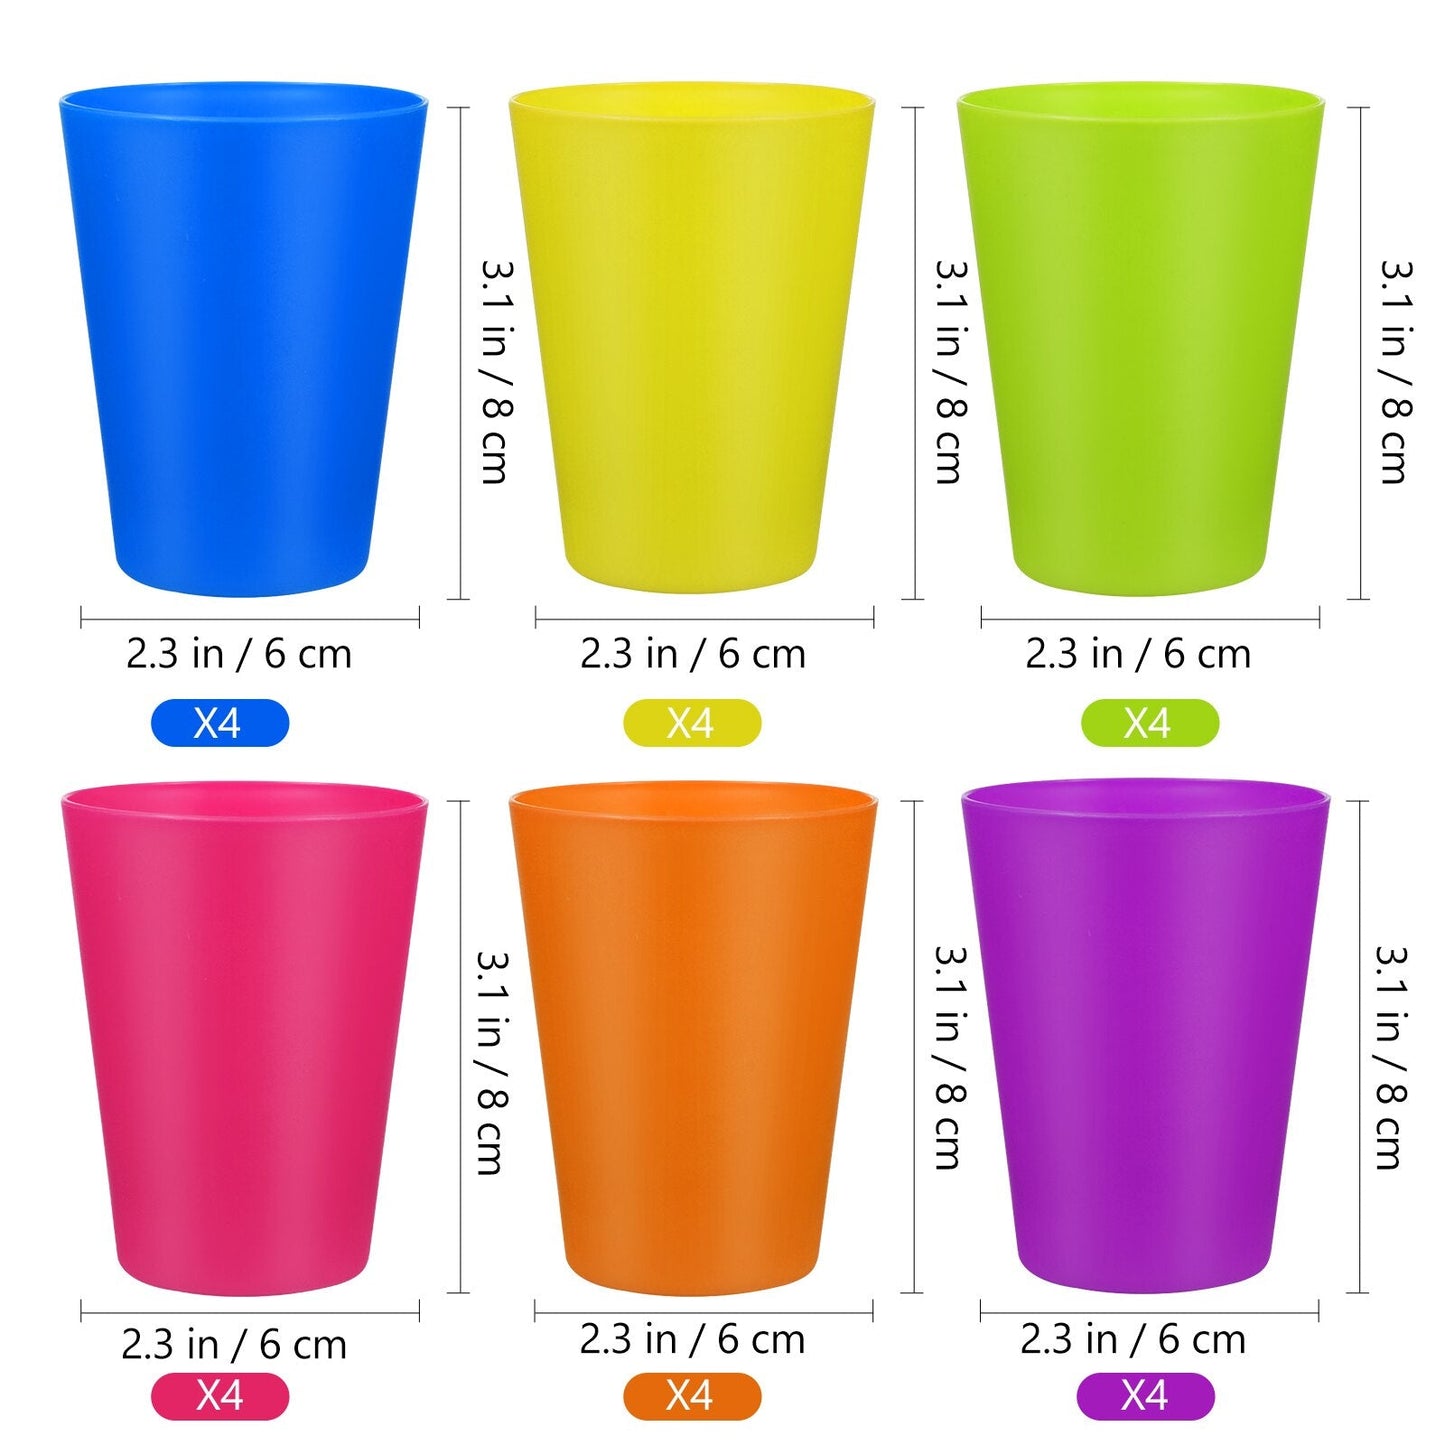 6pcs Reusable Party Drinking Tumblers Kids Cup Water Unbreakable glass